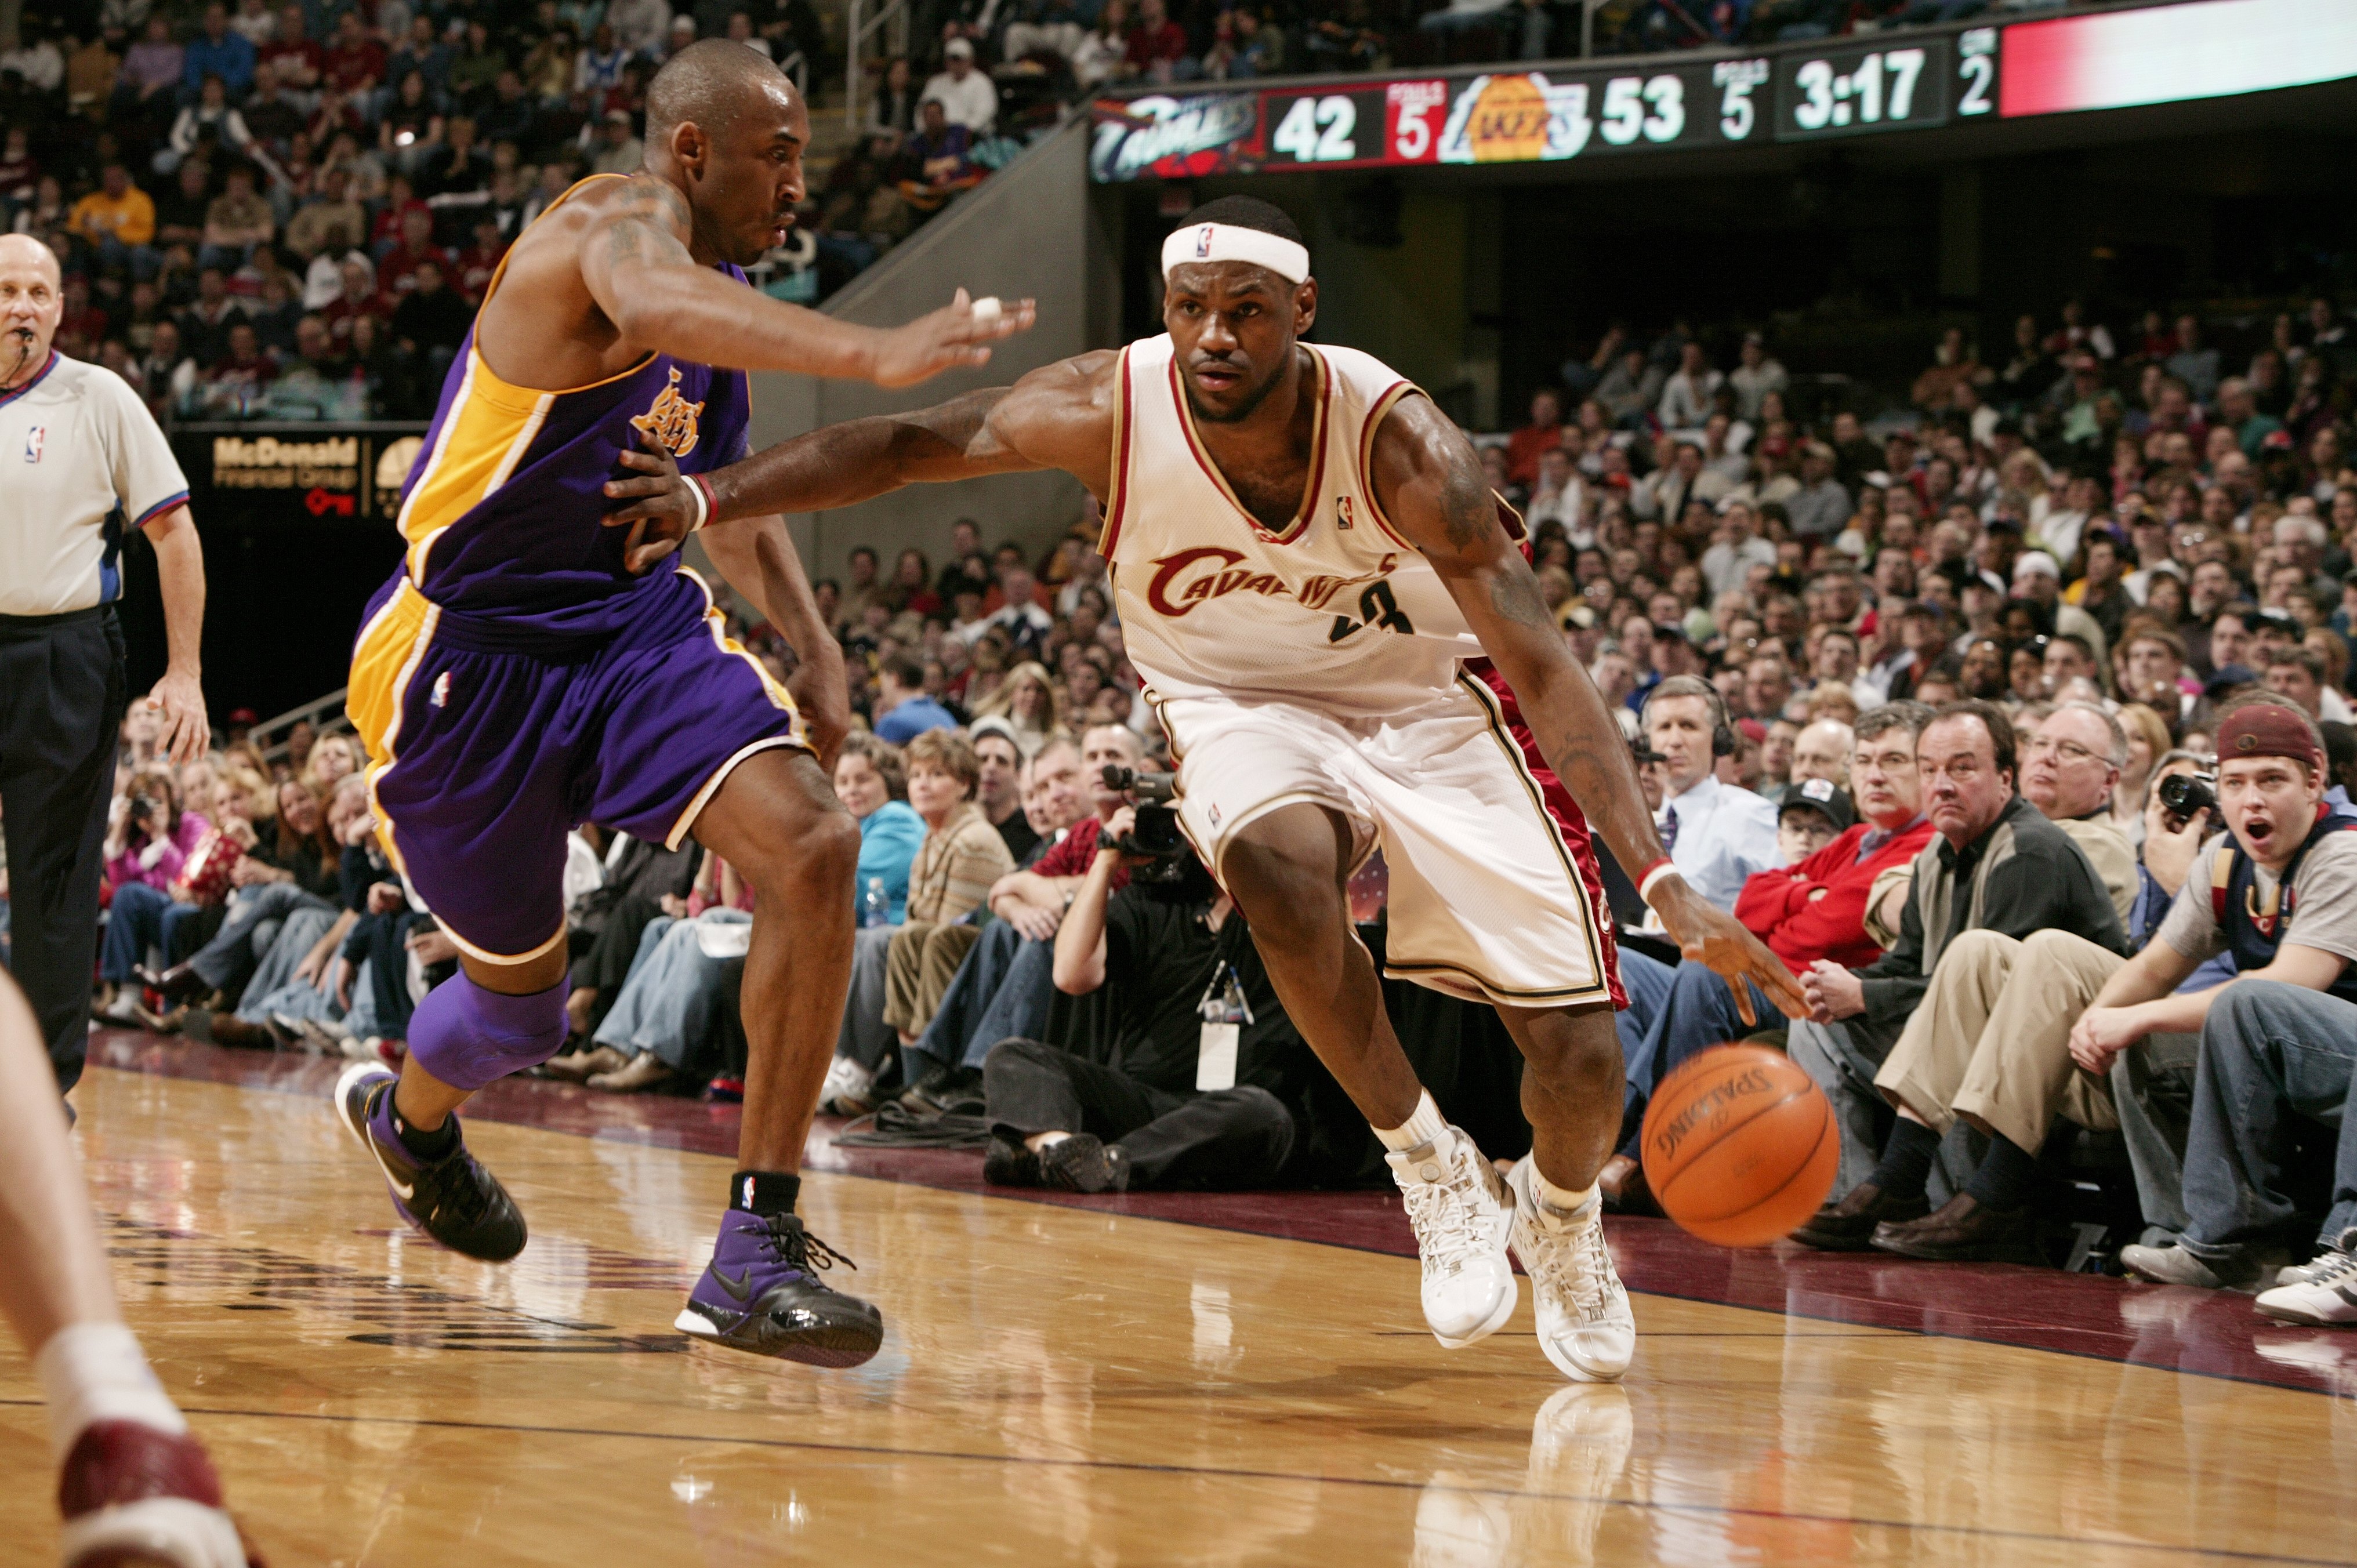 LeBron James #23 of the Cleveland Cavaliers drives to the basket against Kobe Bryant #8 of the Los Angeles Lakers on March 19, 2006 at the Quicken Loans Arena in Cleveland, Ohio.  (Garrett W. Ellwood/NBAE via Getty Images)